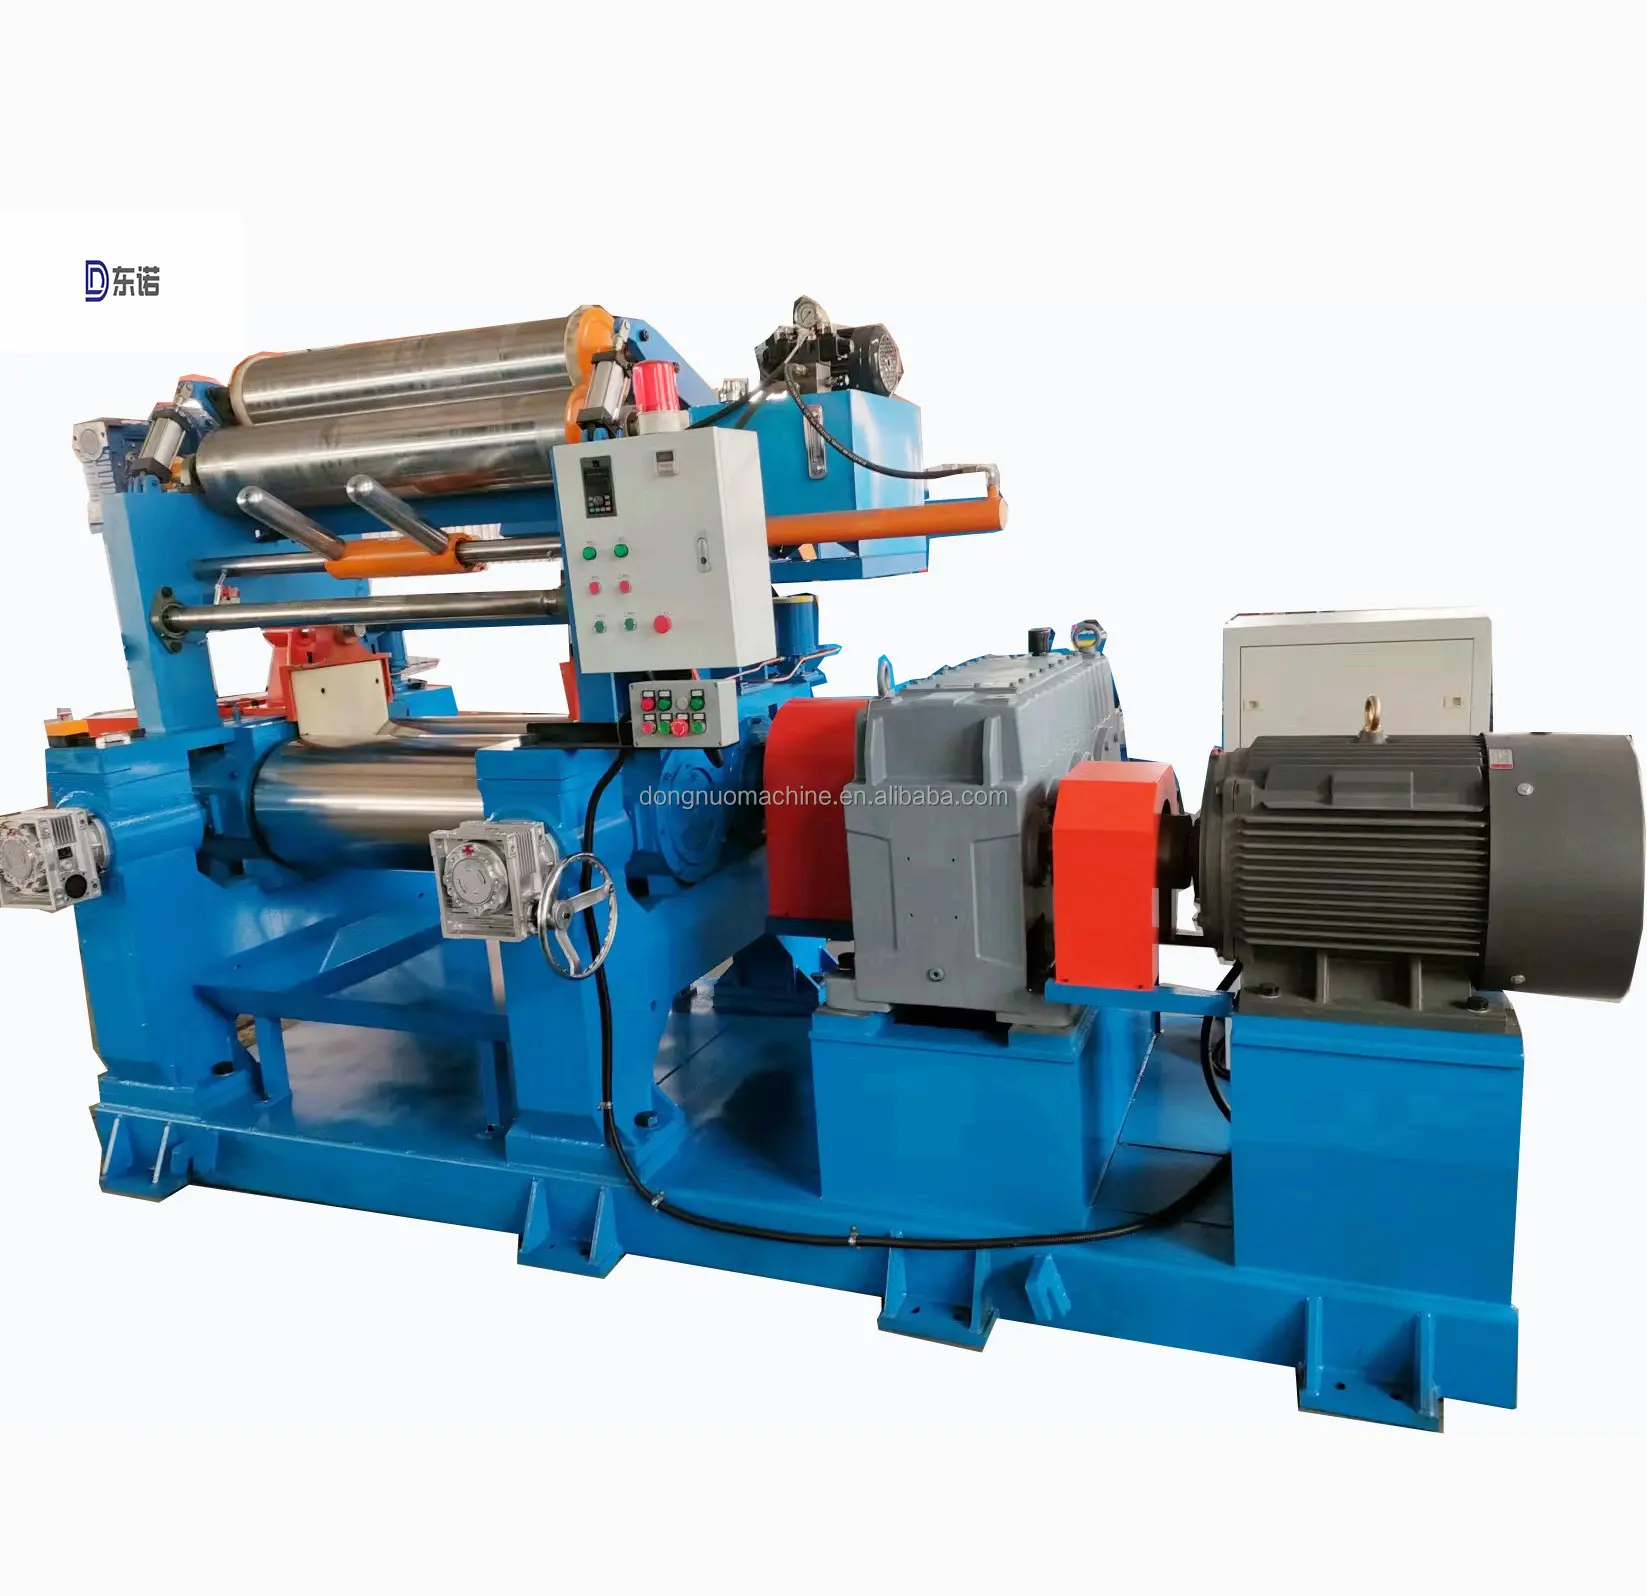 China Manufacturer Best Price XK560 XK660 silicone two roll open mixing mill rubber mixing machine